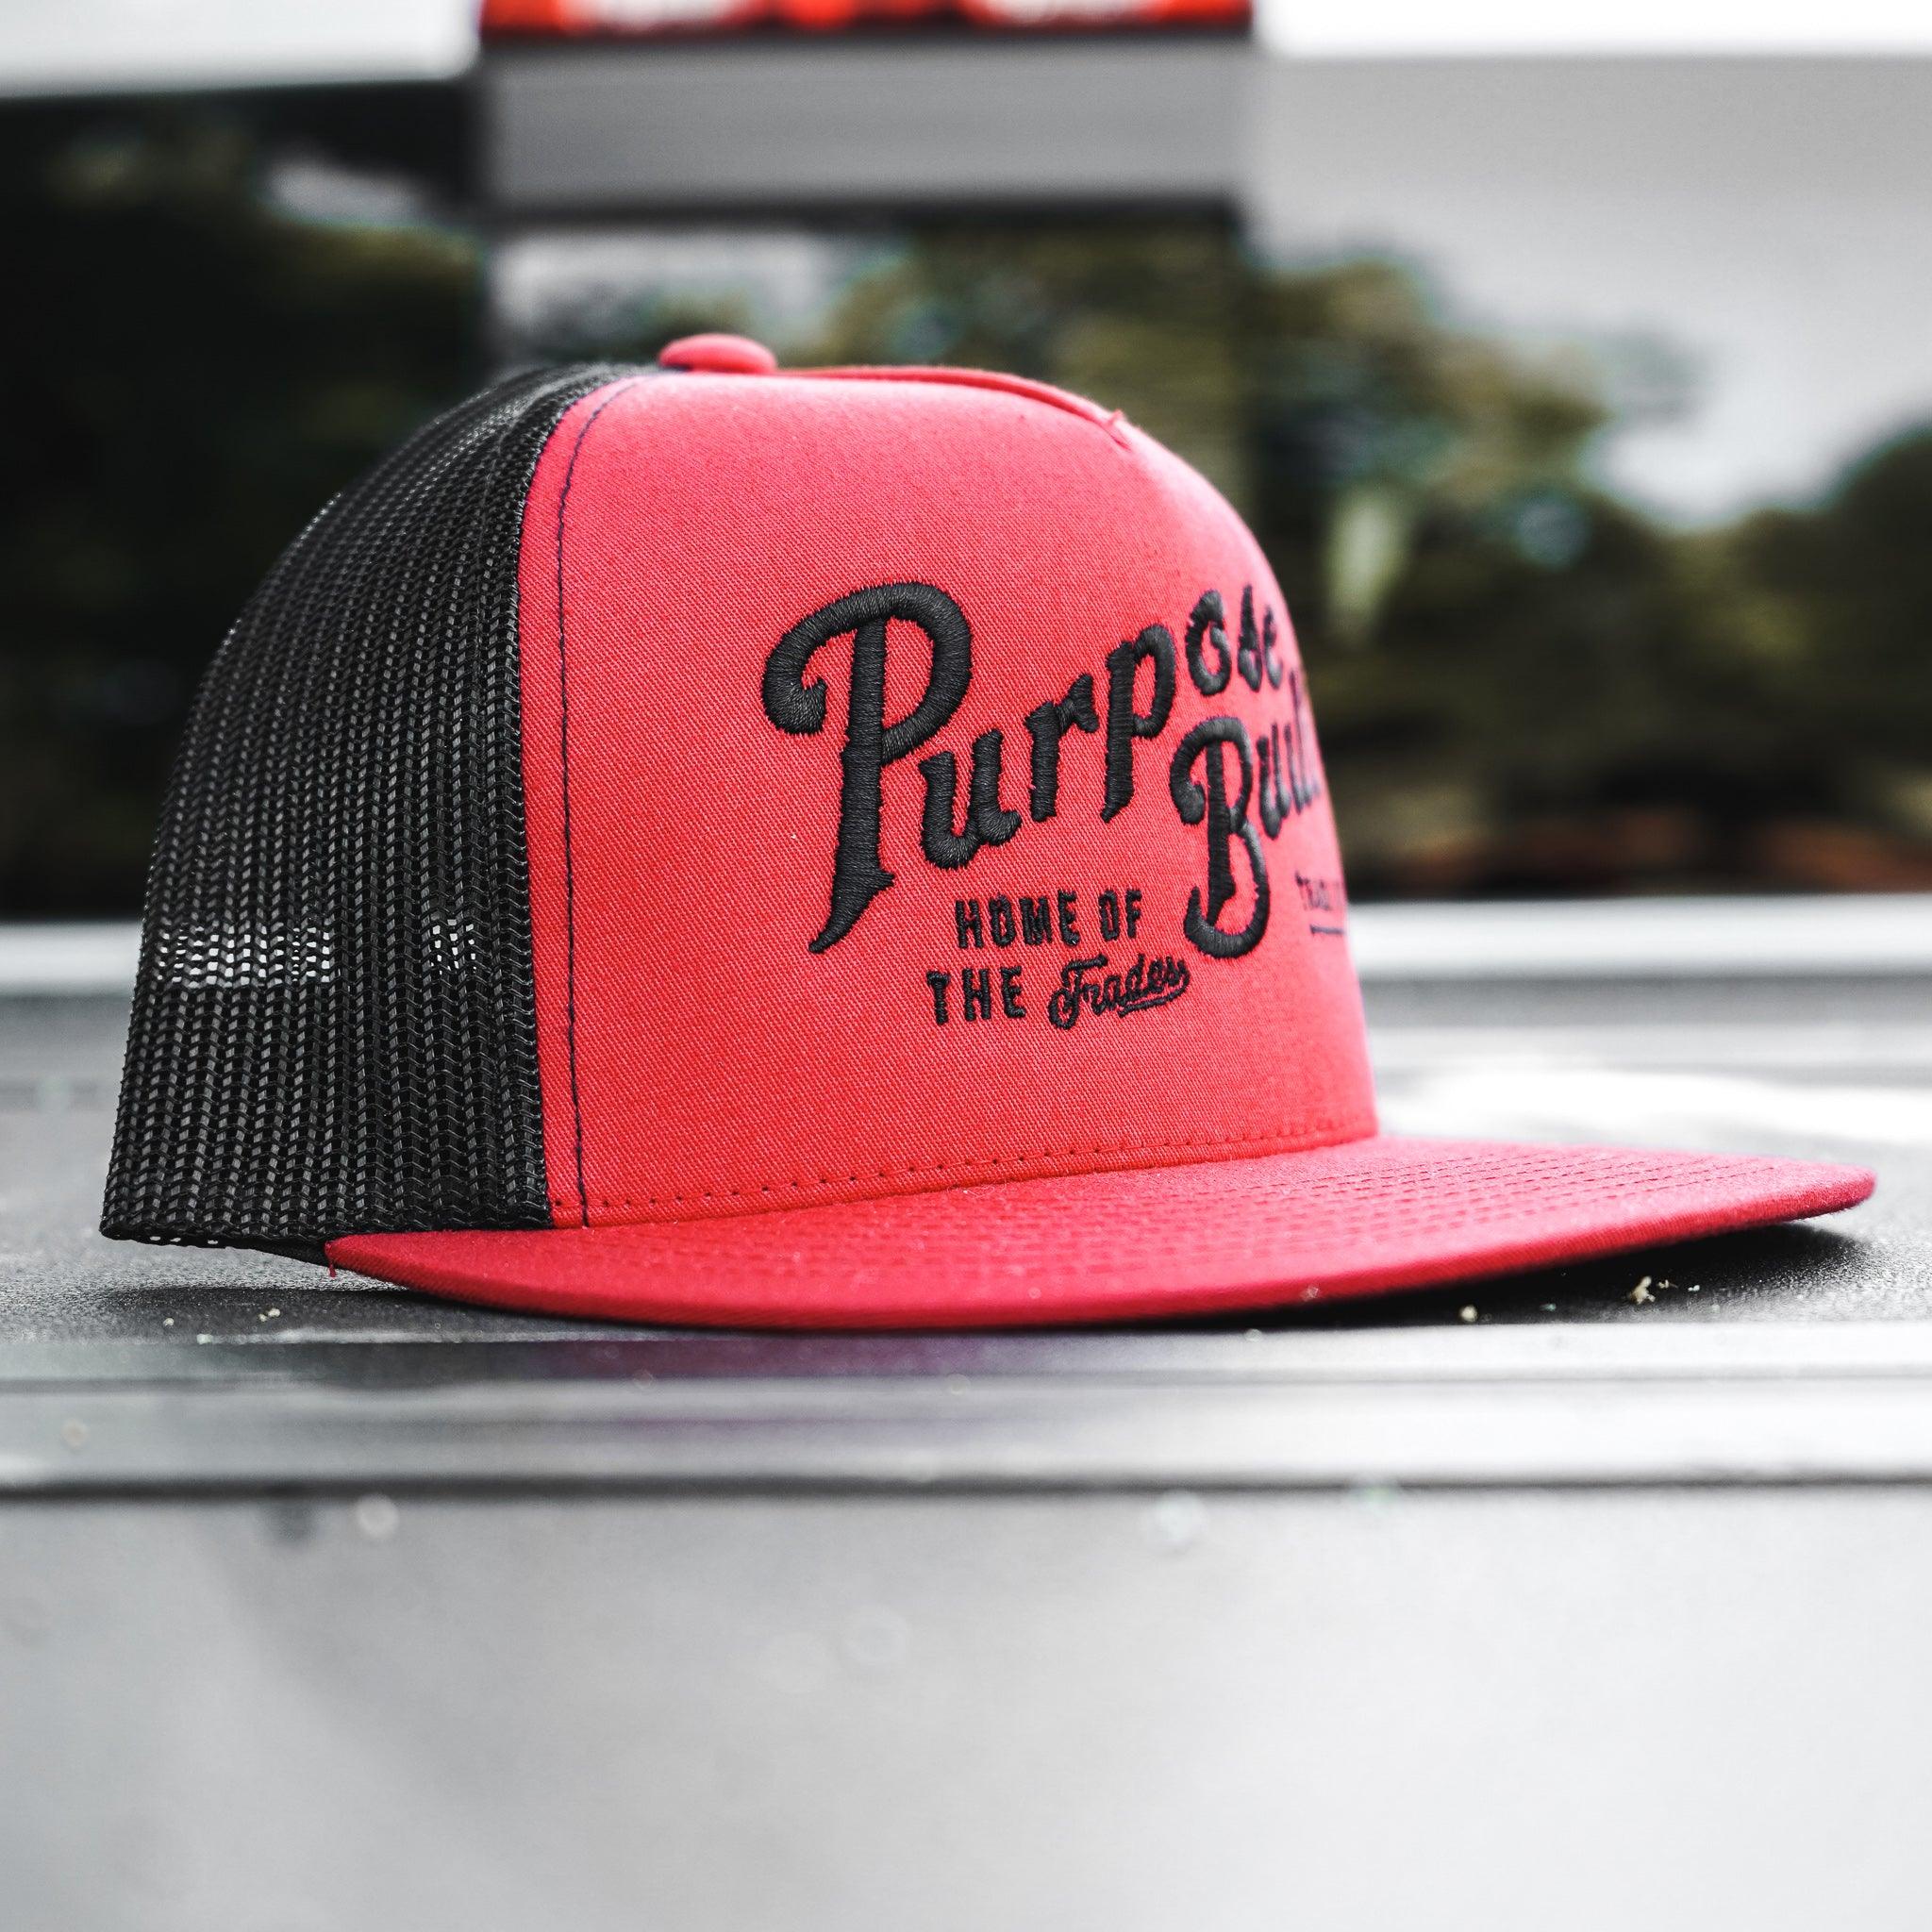 Freightline Snapback Hat - Red/Black - Purpose-Built / Home of the Trades